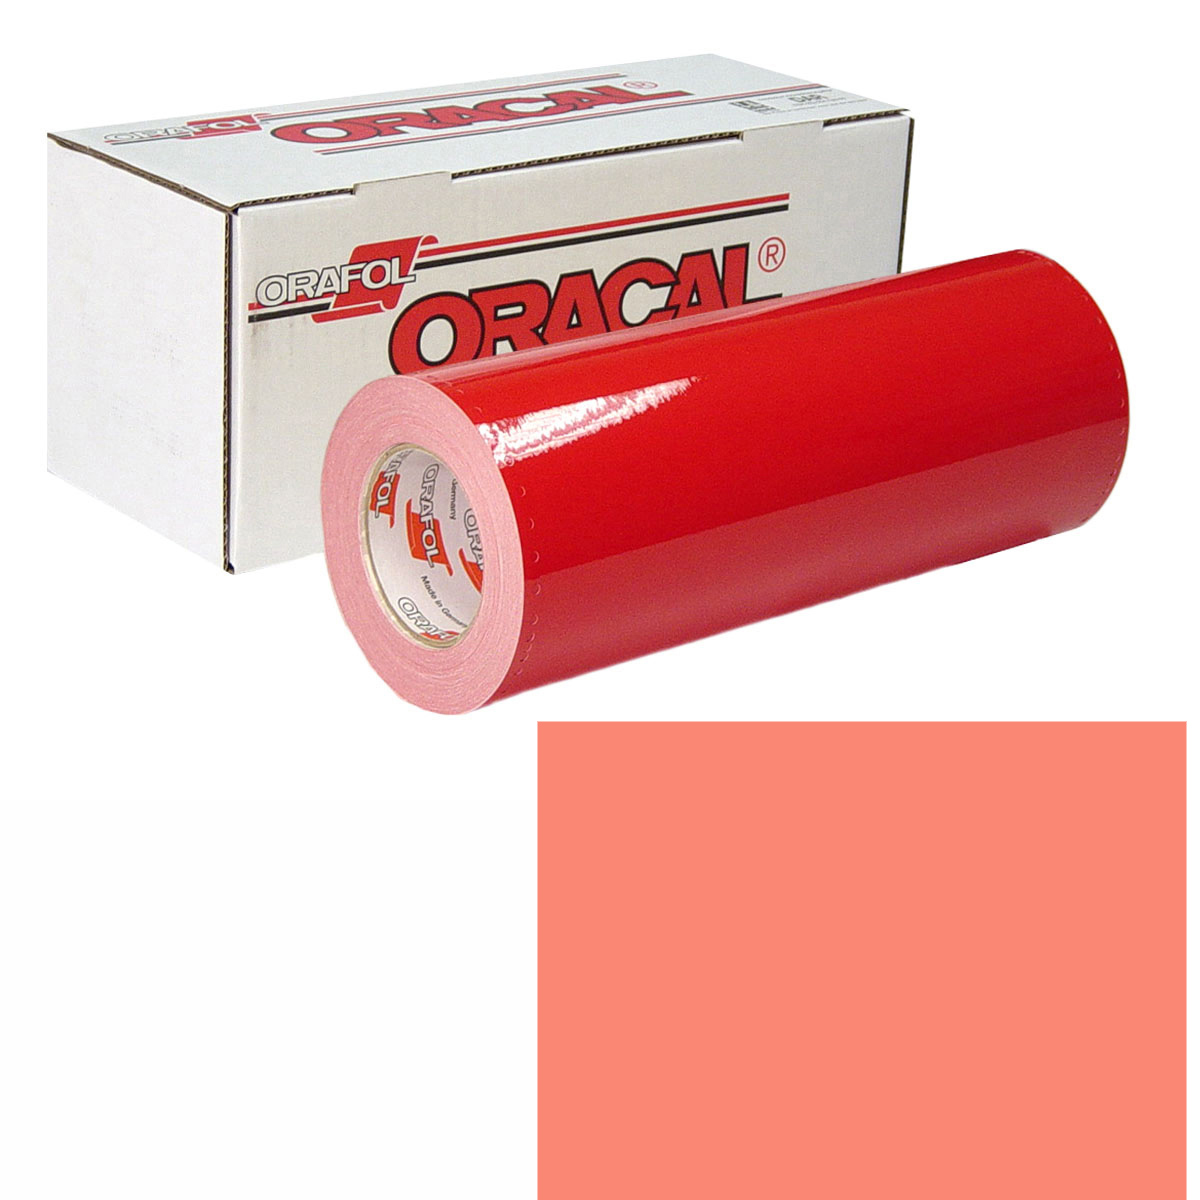 ORACAL 951 15in X 10yd 341 Coral